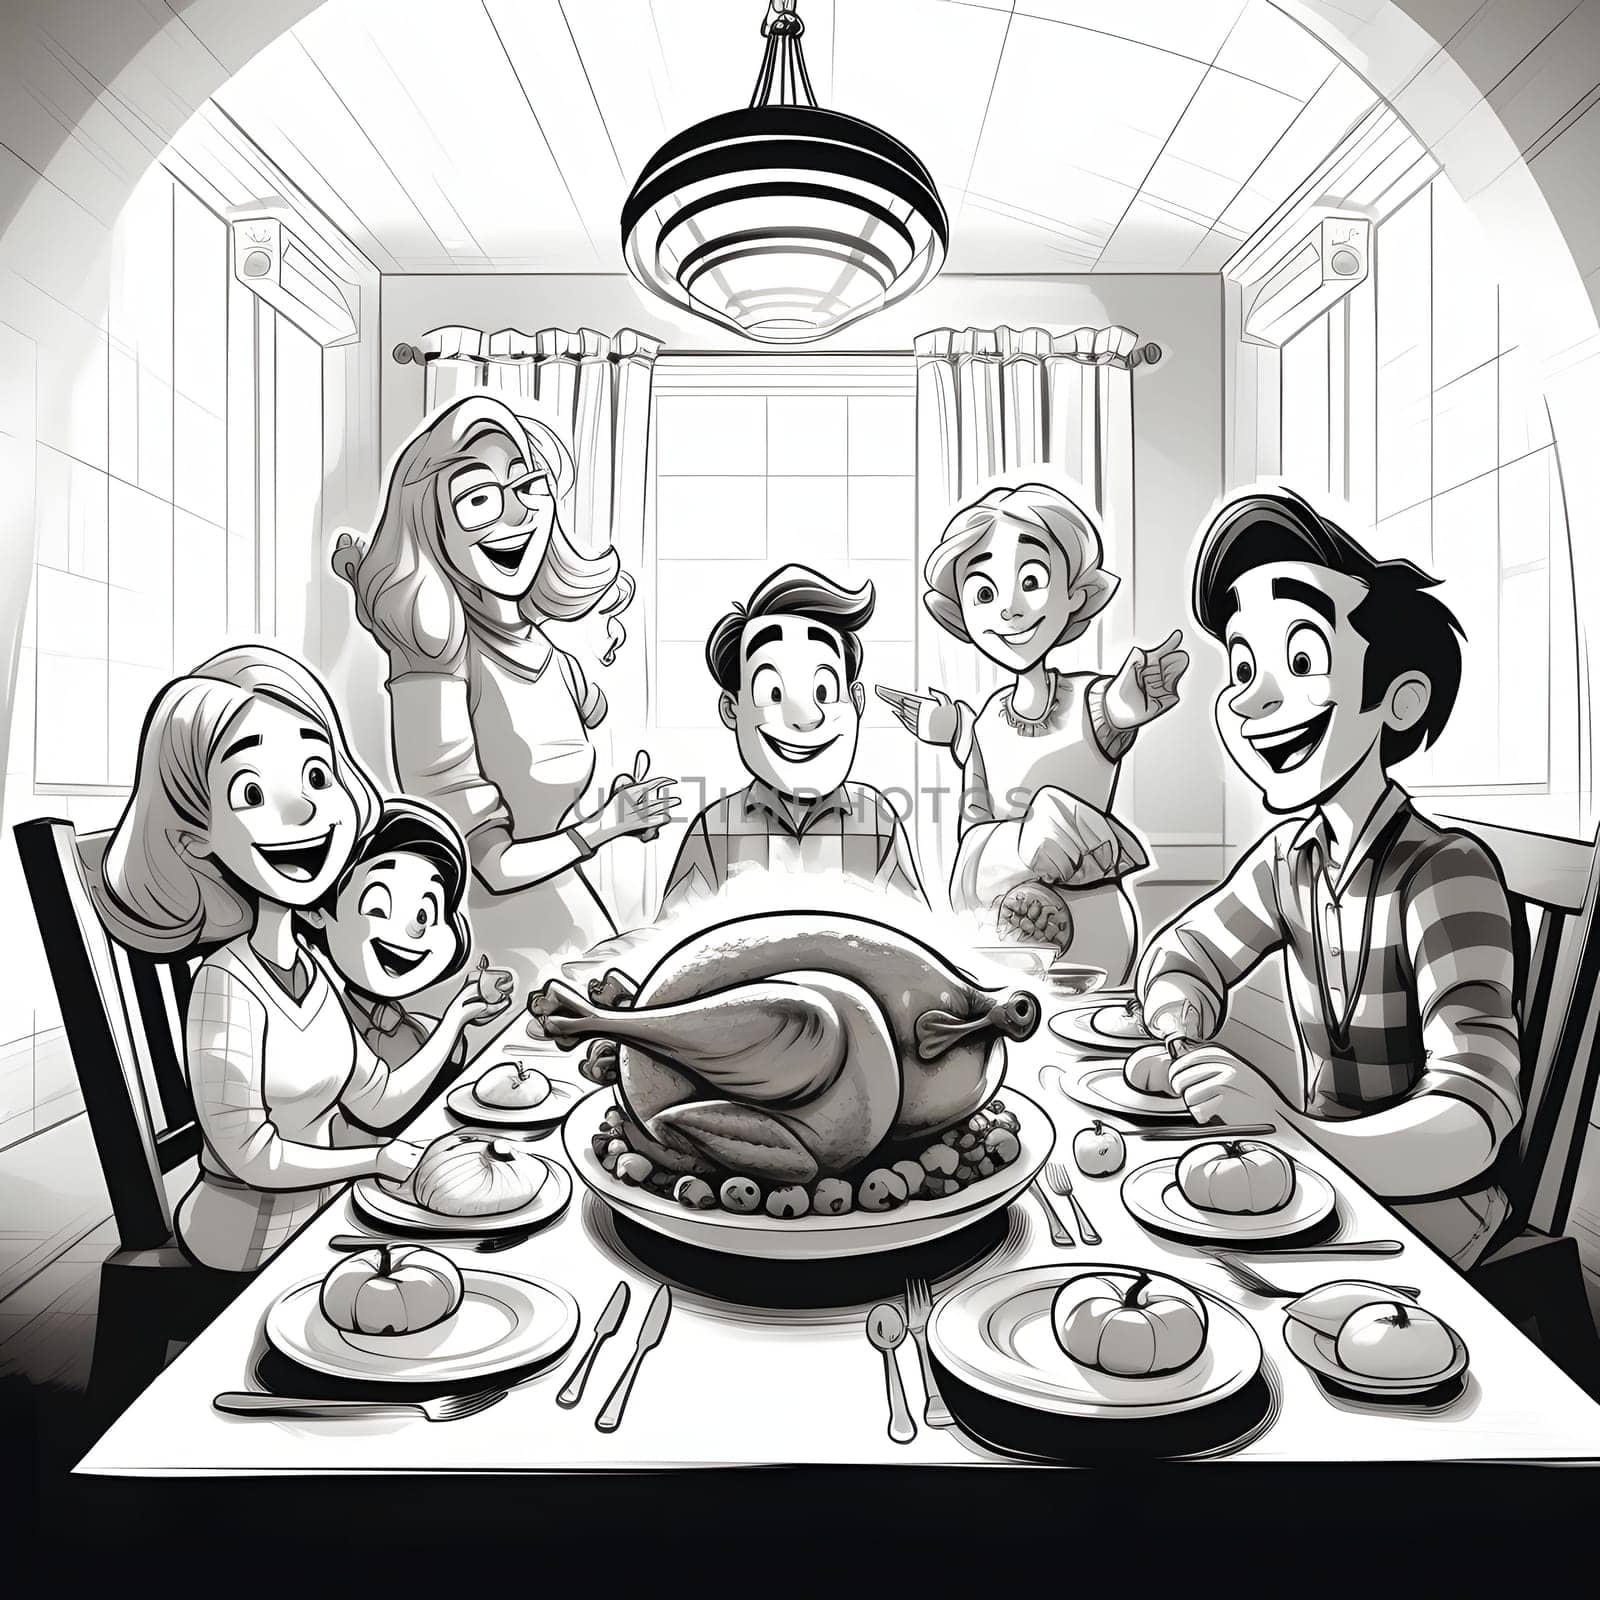 Black and White coloring illustration of a happy family at a holiday table in the middle of a roast turkey, pumpkins. Turkey as the main dish of thanksgiving for the harvest. An atmosphere of joy and celebration.